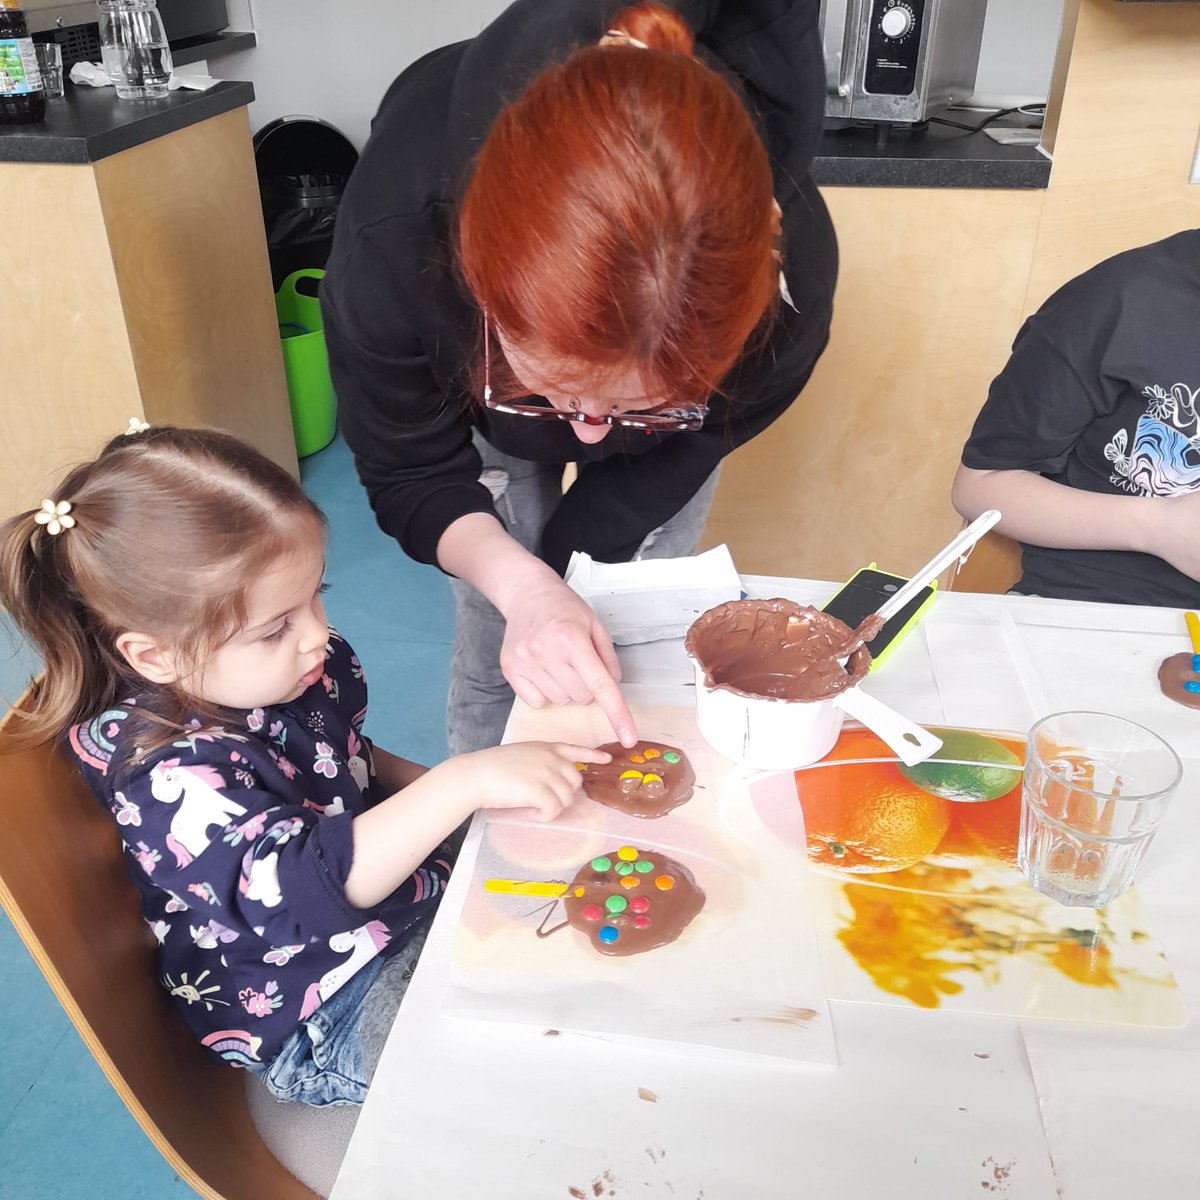 🍭Some of the youngsters from Frome's refugee community enjoyed a chocolate lollipop making session at the Welcome Hub today, and the smiles say it all! Find out about the Welcome Hub and services and activities to support displaced people in Frome at frometowncouncil.gov.uk/our-community/…